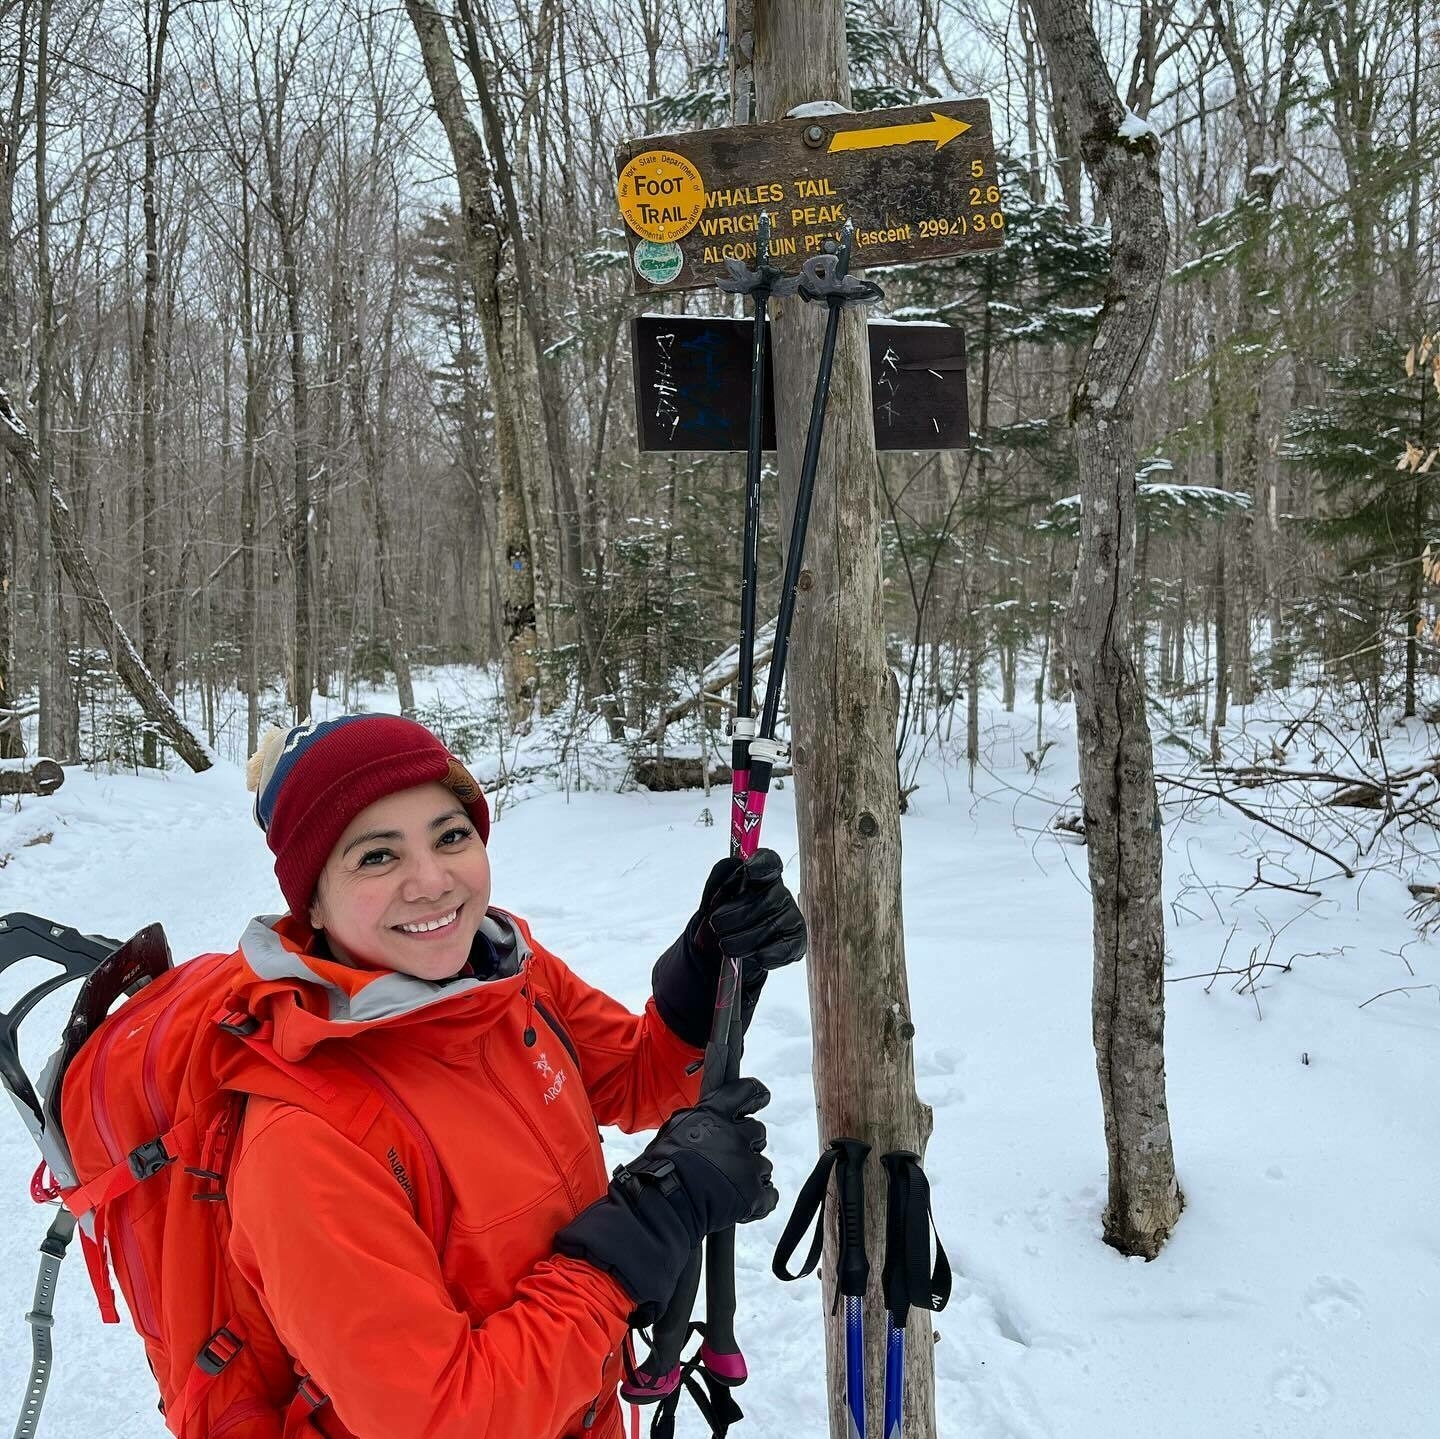 A smiling person holding hiking poles stands next to a trail sign in a snowy forest. The sign reads &ldquo;FOOT TRAIL → WHALES TAIL 5 WRIGHT PEAK 2.6 ALGONQUIN PEAK 2994'↑3.0.&quot;